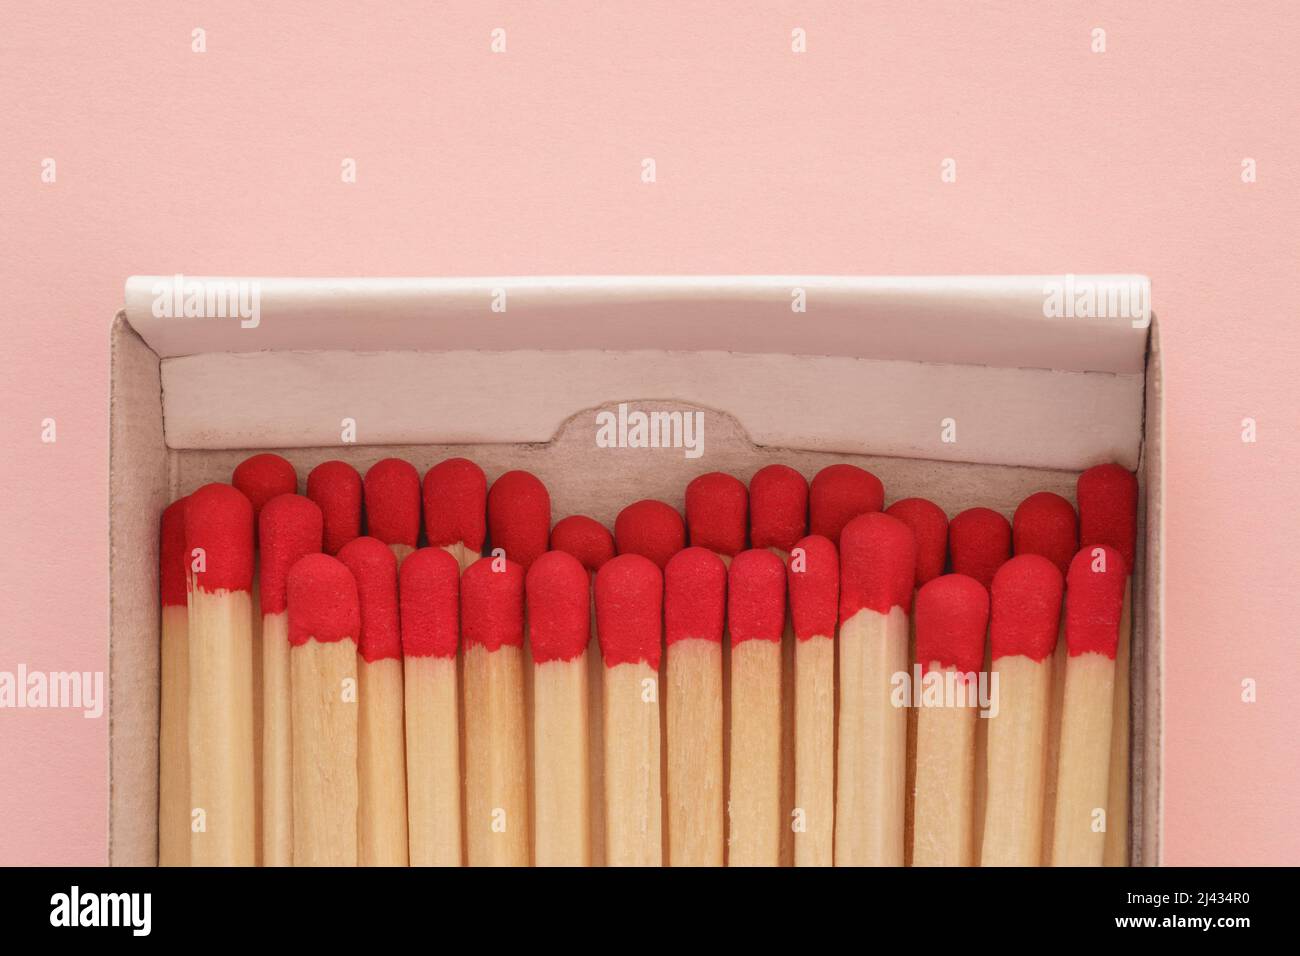 natural wooden matches side by side packed in box on pink background, close-up, flat lay Stock Photo